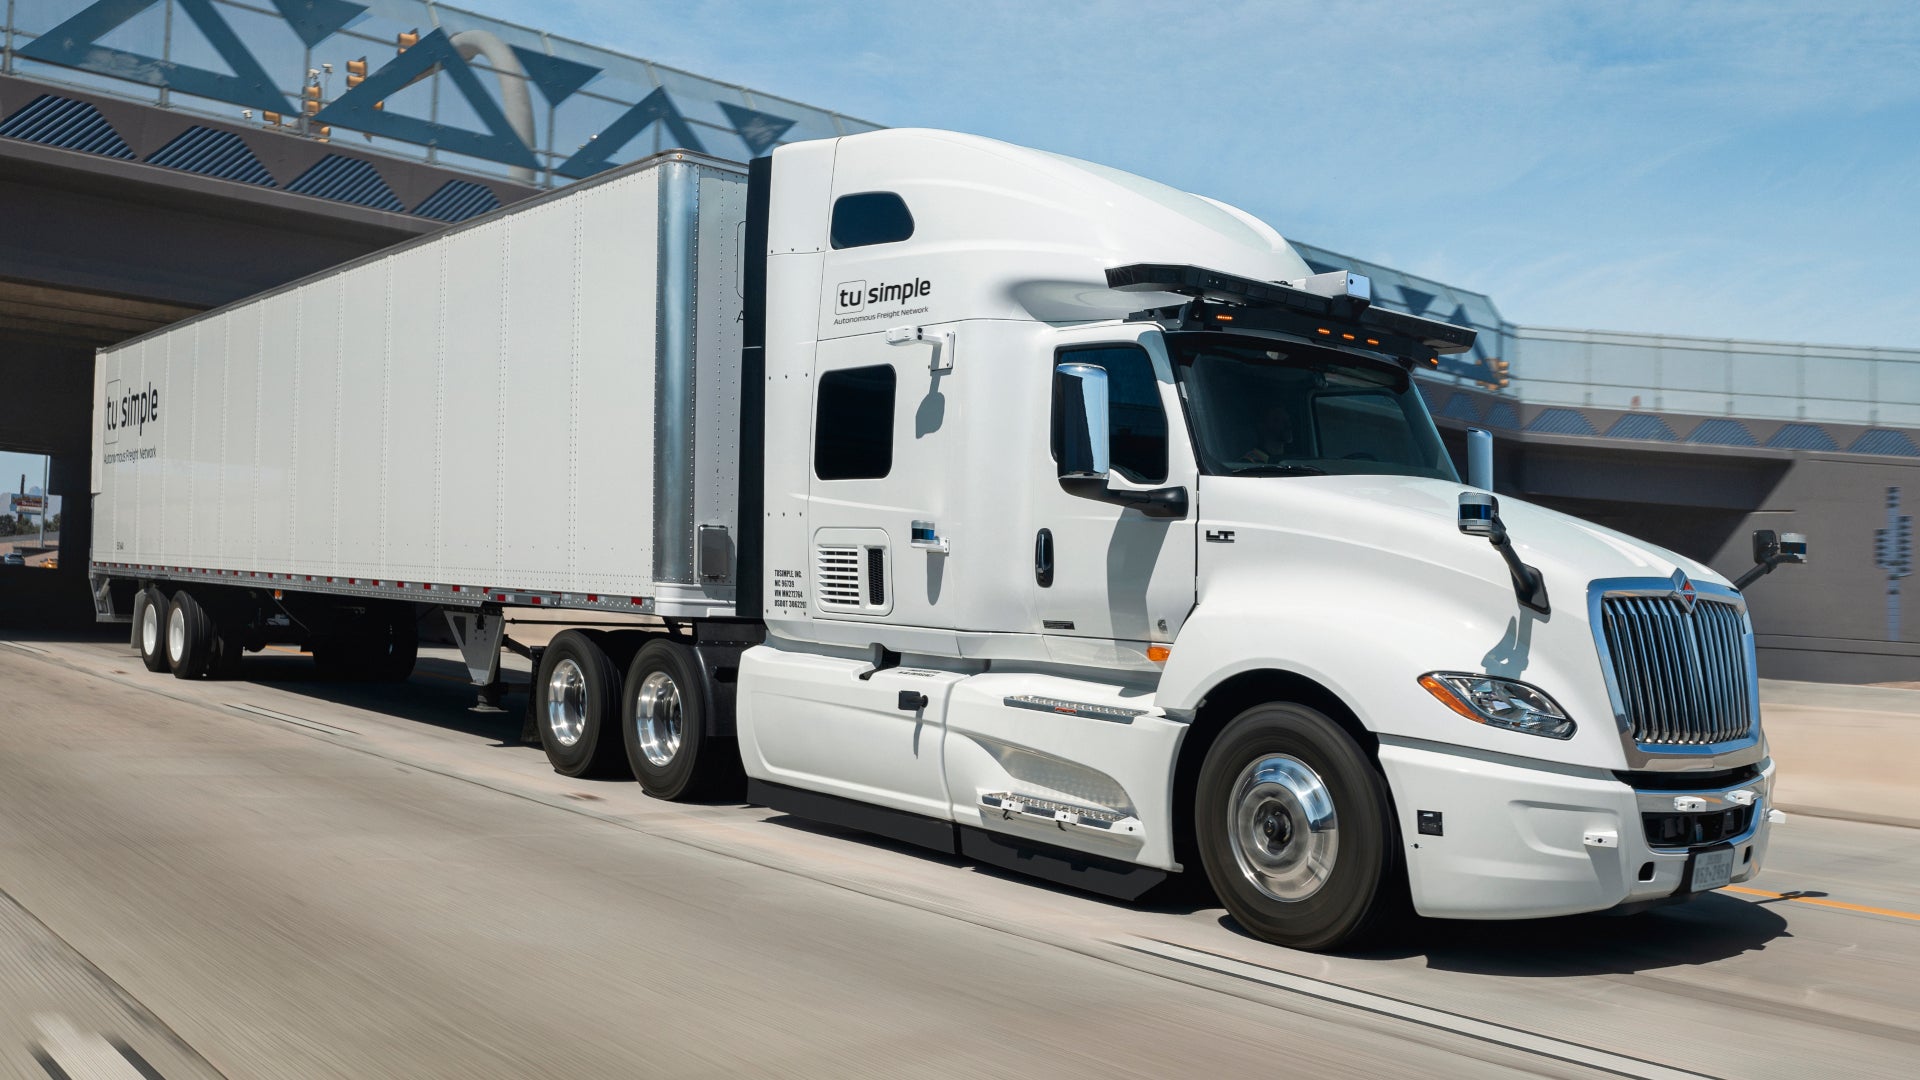 Navistar Offers Up on Self-Using Truck Partnership With TuSimple